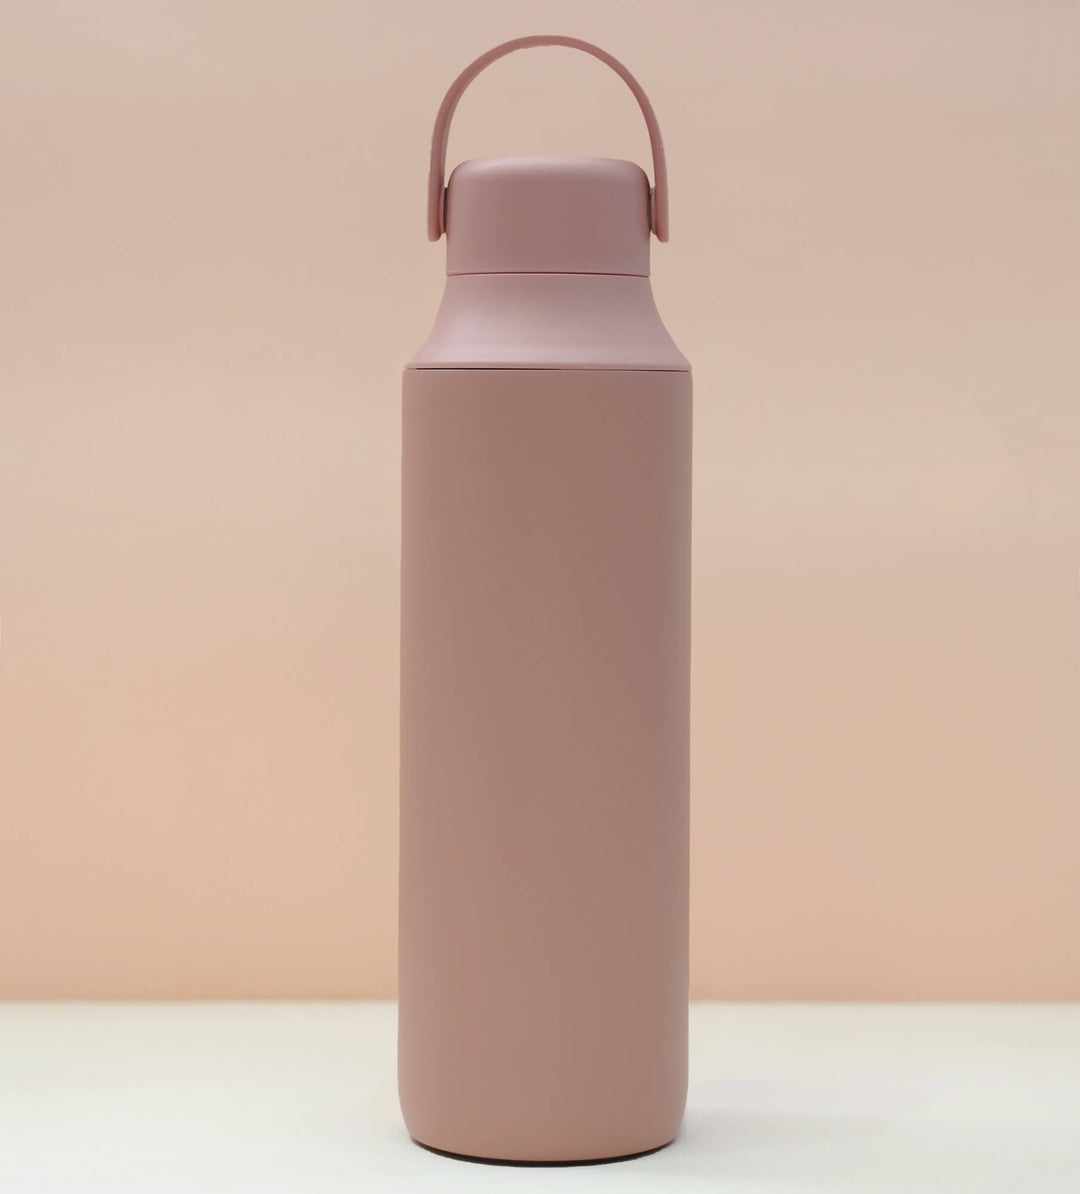 Sora 750ml Thermal Stainless Steel Water Bottle with Ceramic Coating